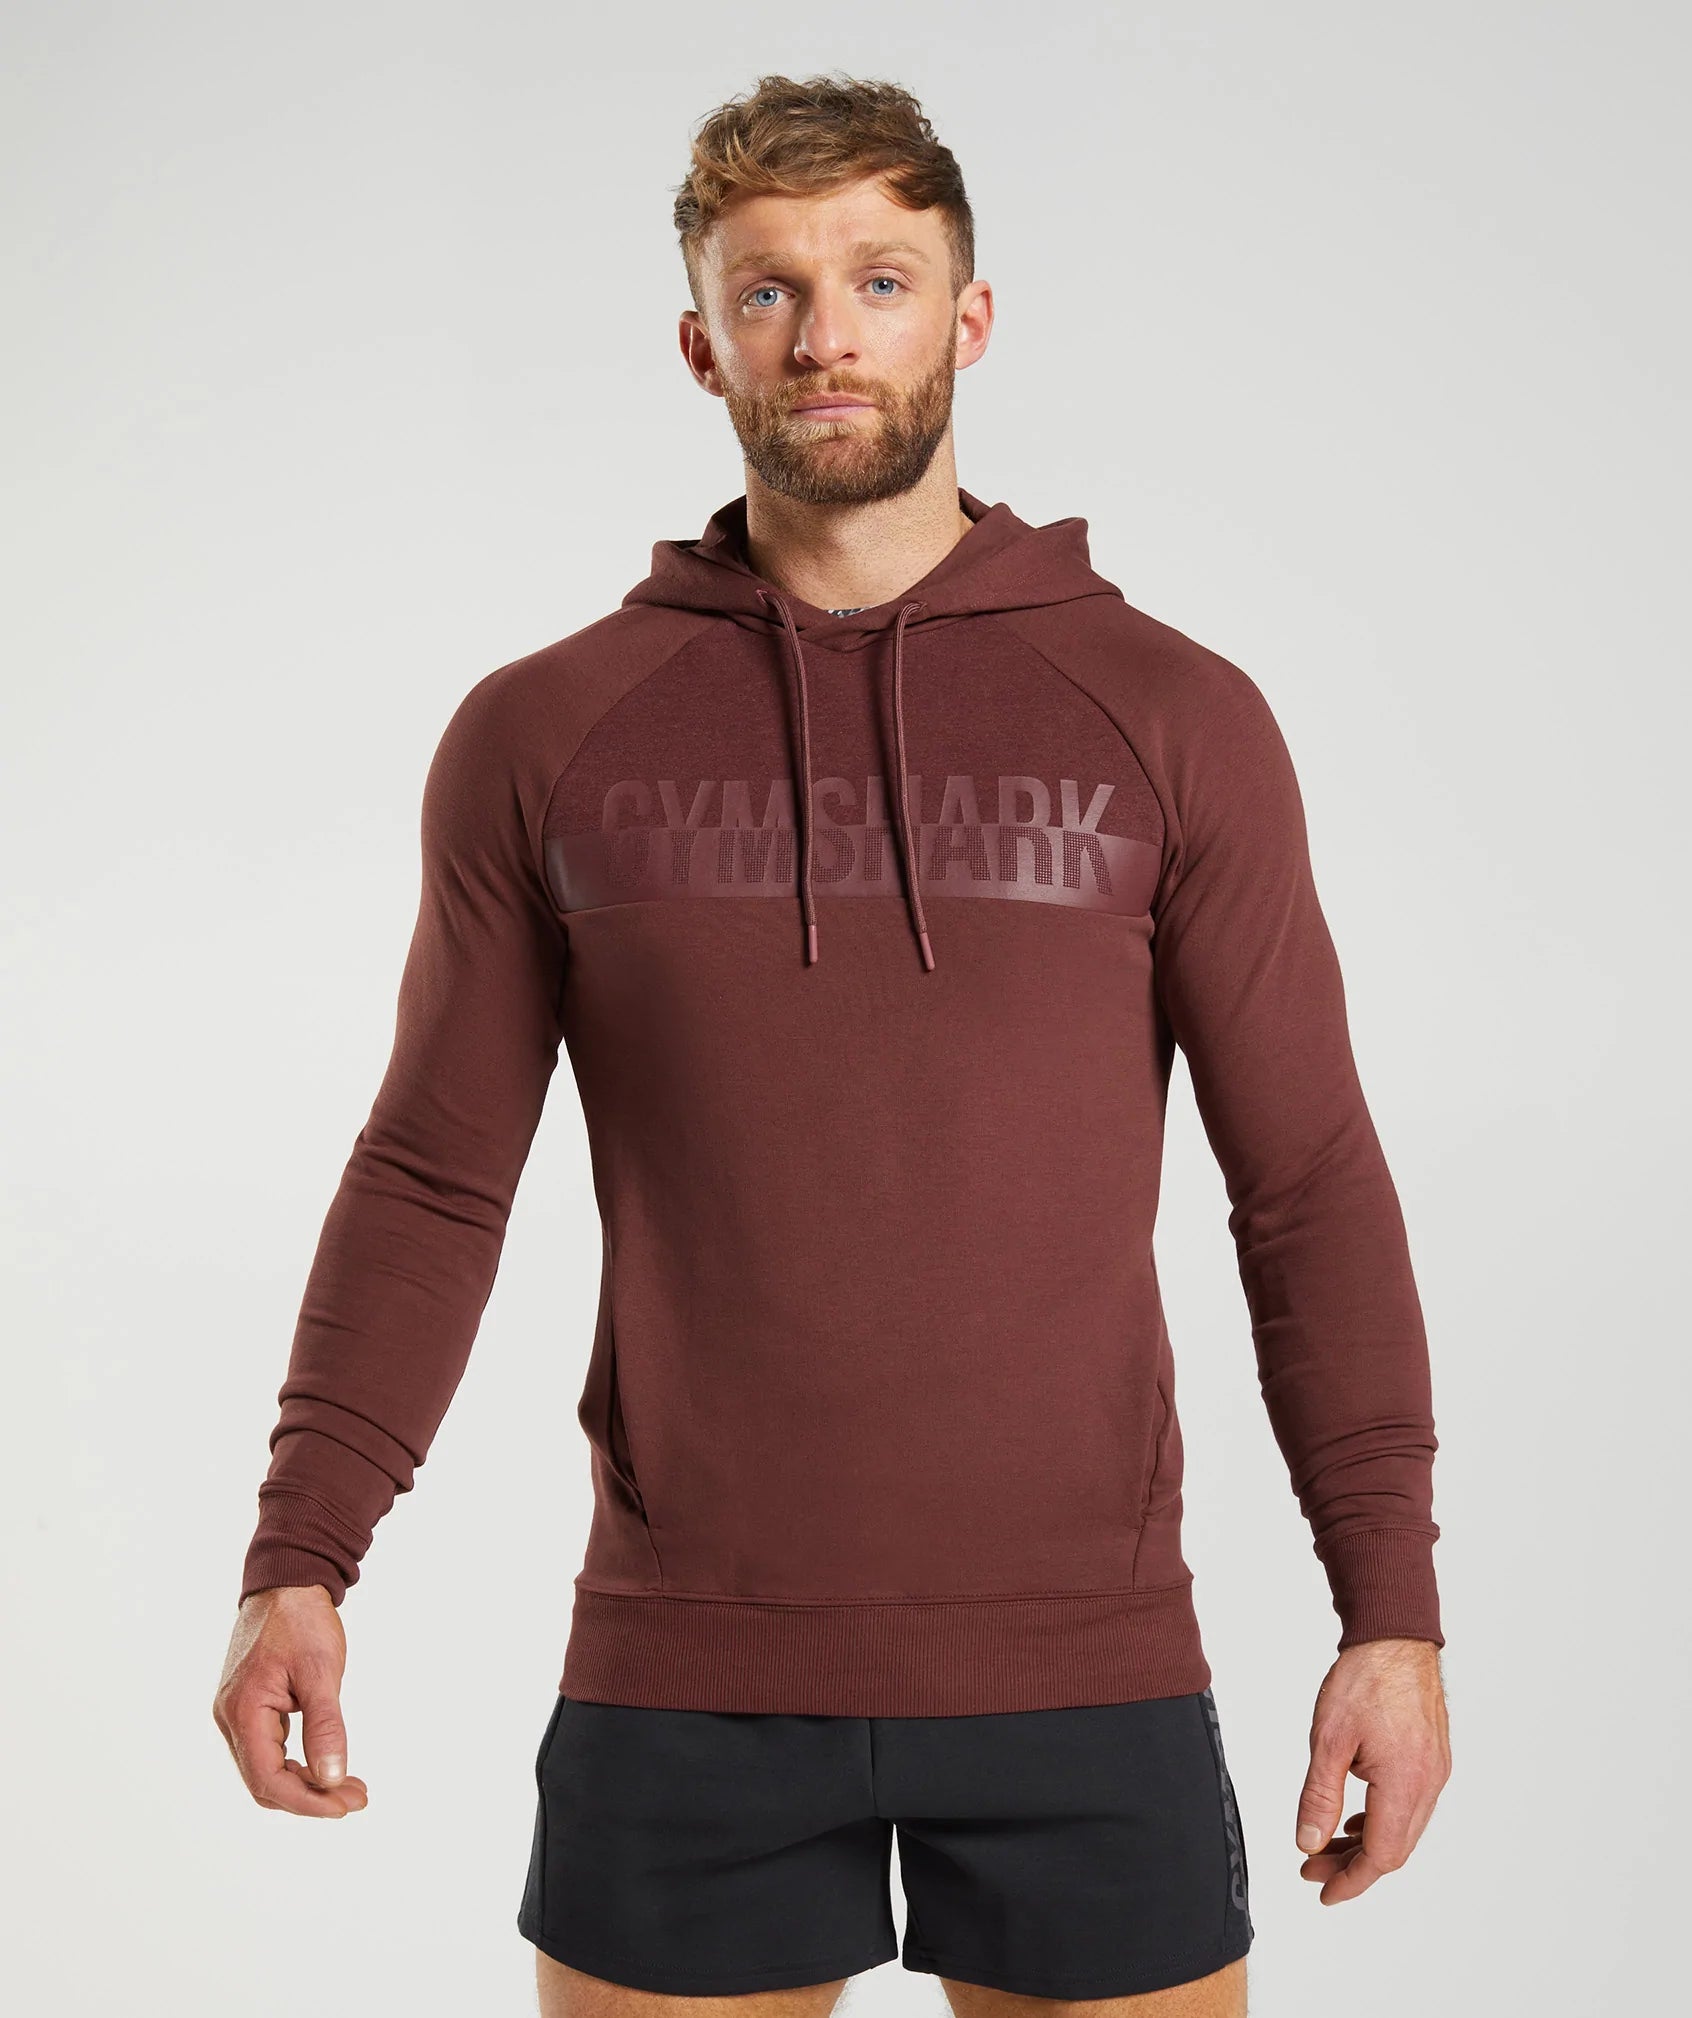 Bold React Hoodie in Cherry Brown